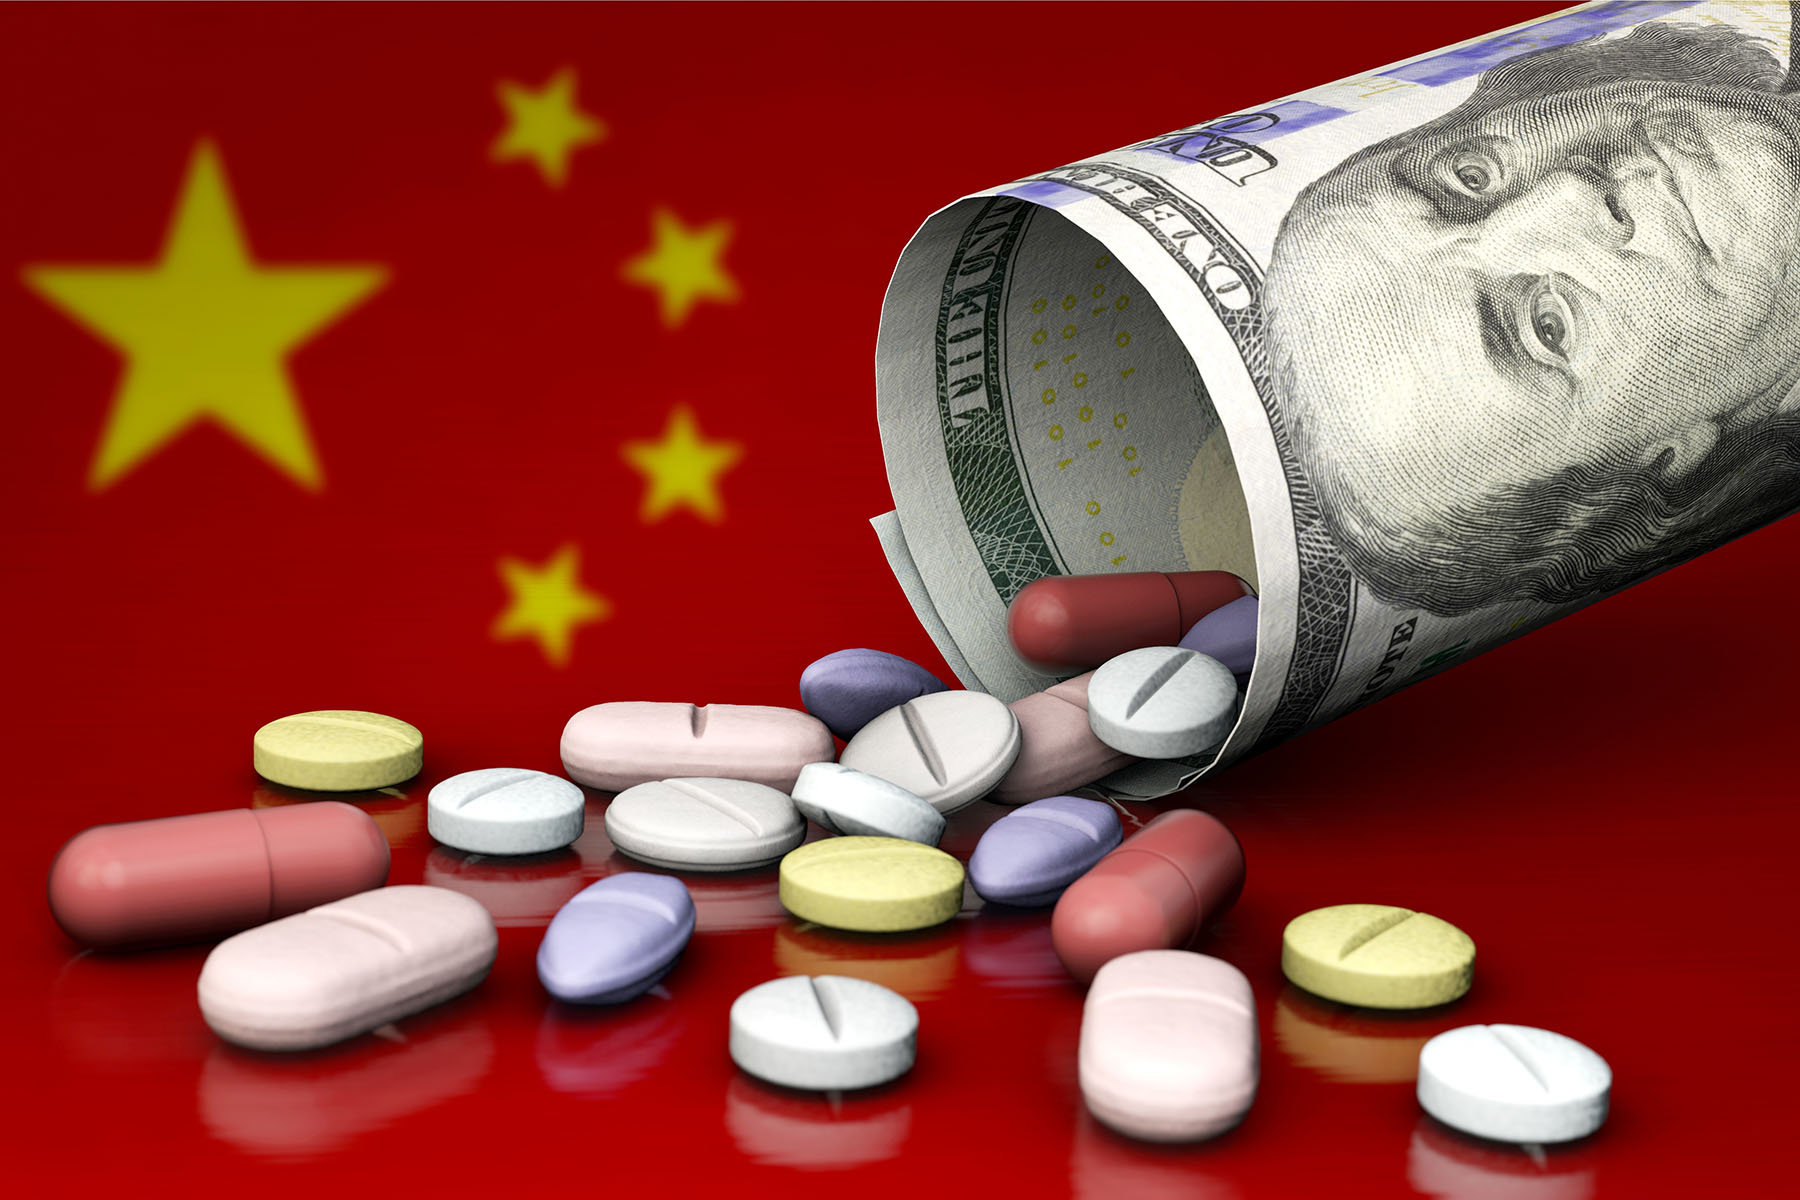 A rolled up $100 U.S. bill dumping various medical pills onto the Chinese flag